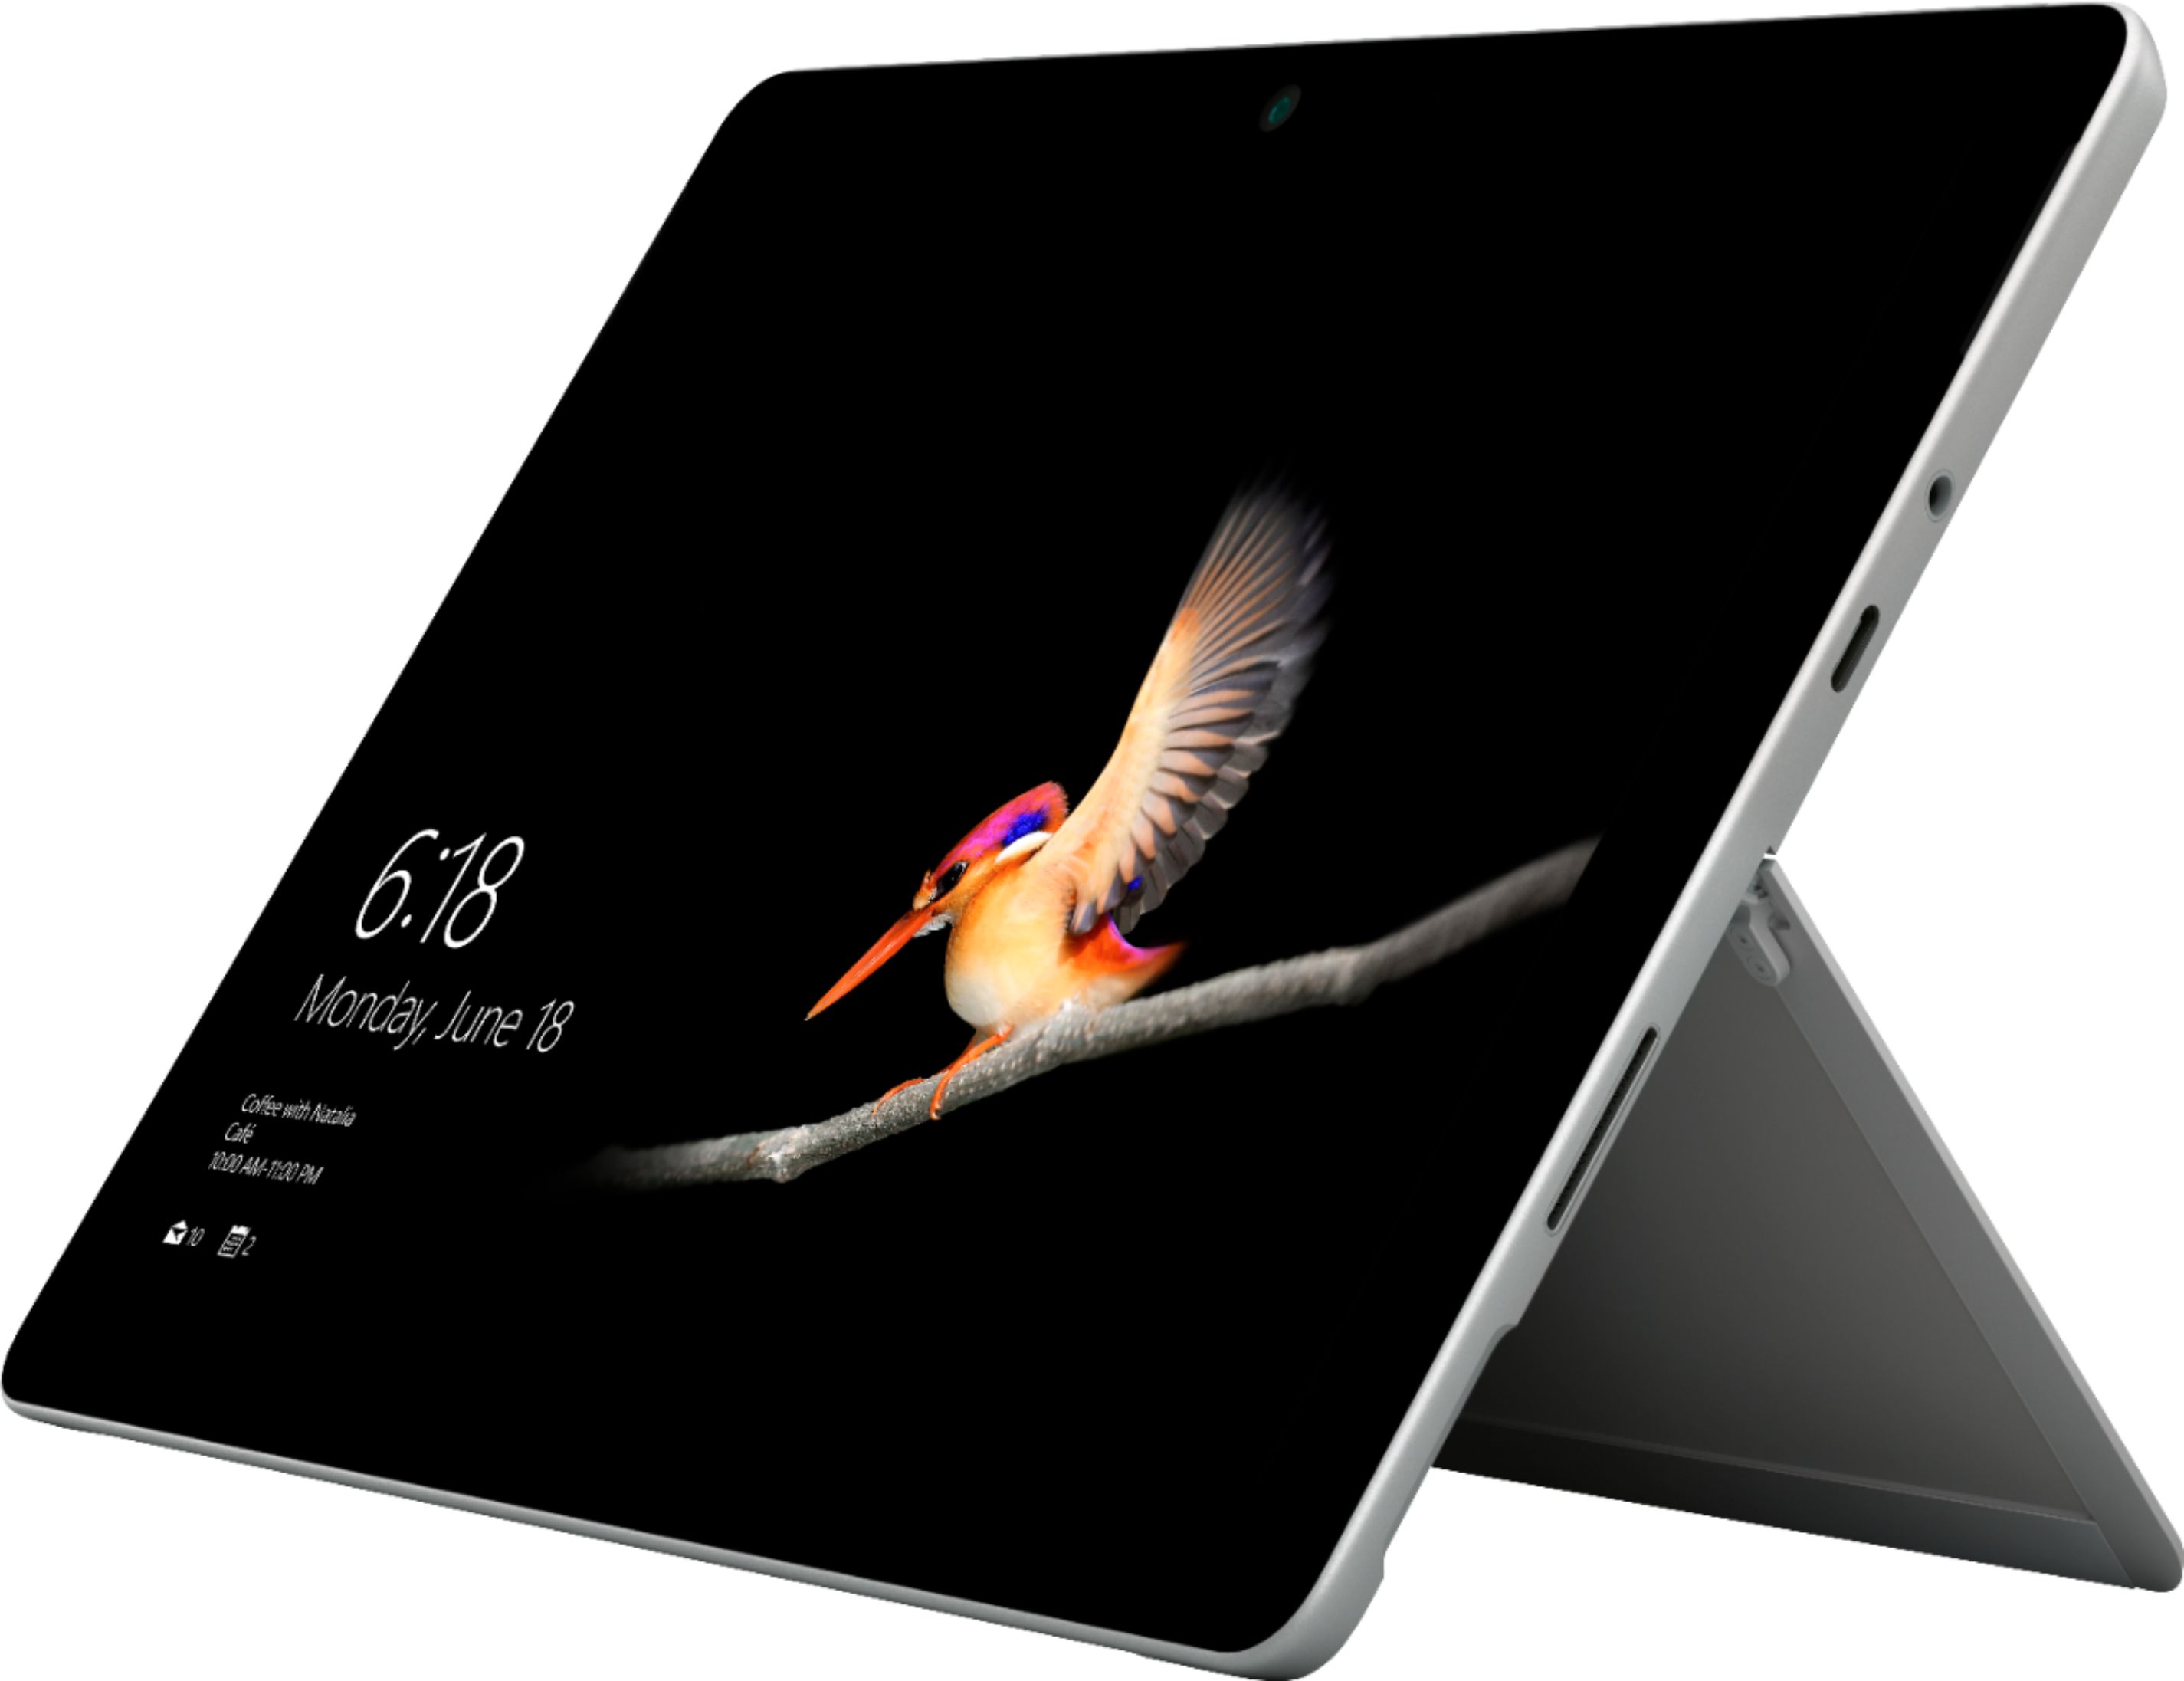 Microsoft Surface Go: The New Tablet That We've Been Dreaming of Forever